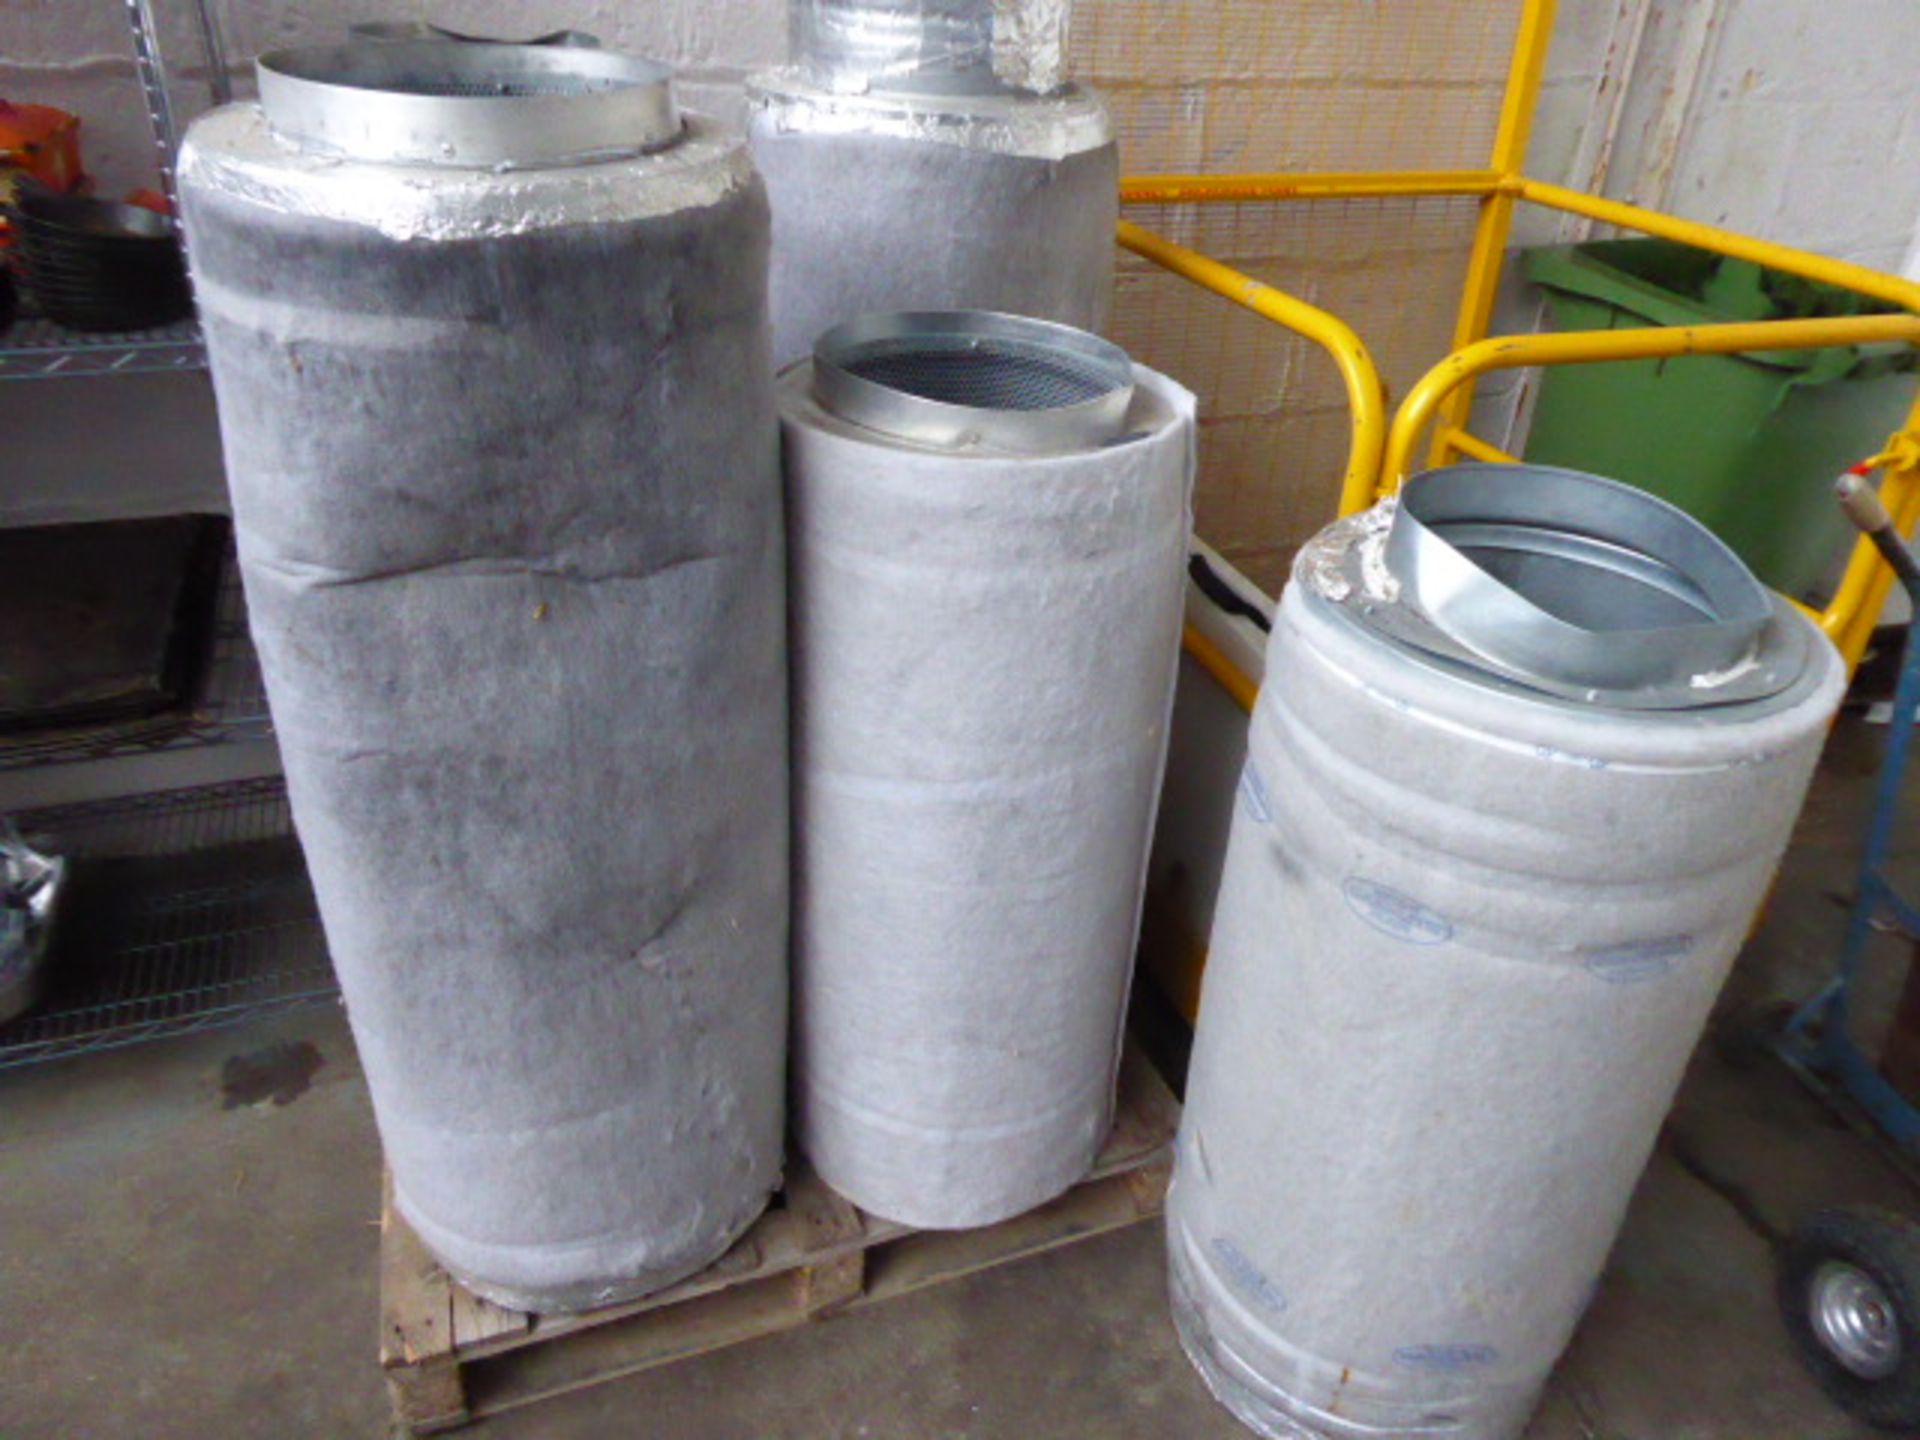 443 - 7 sections of Phresh Filter ducting